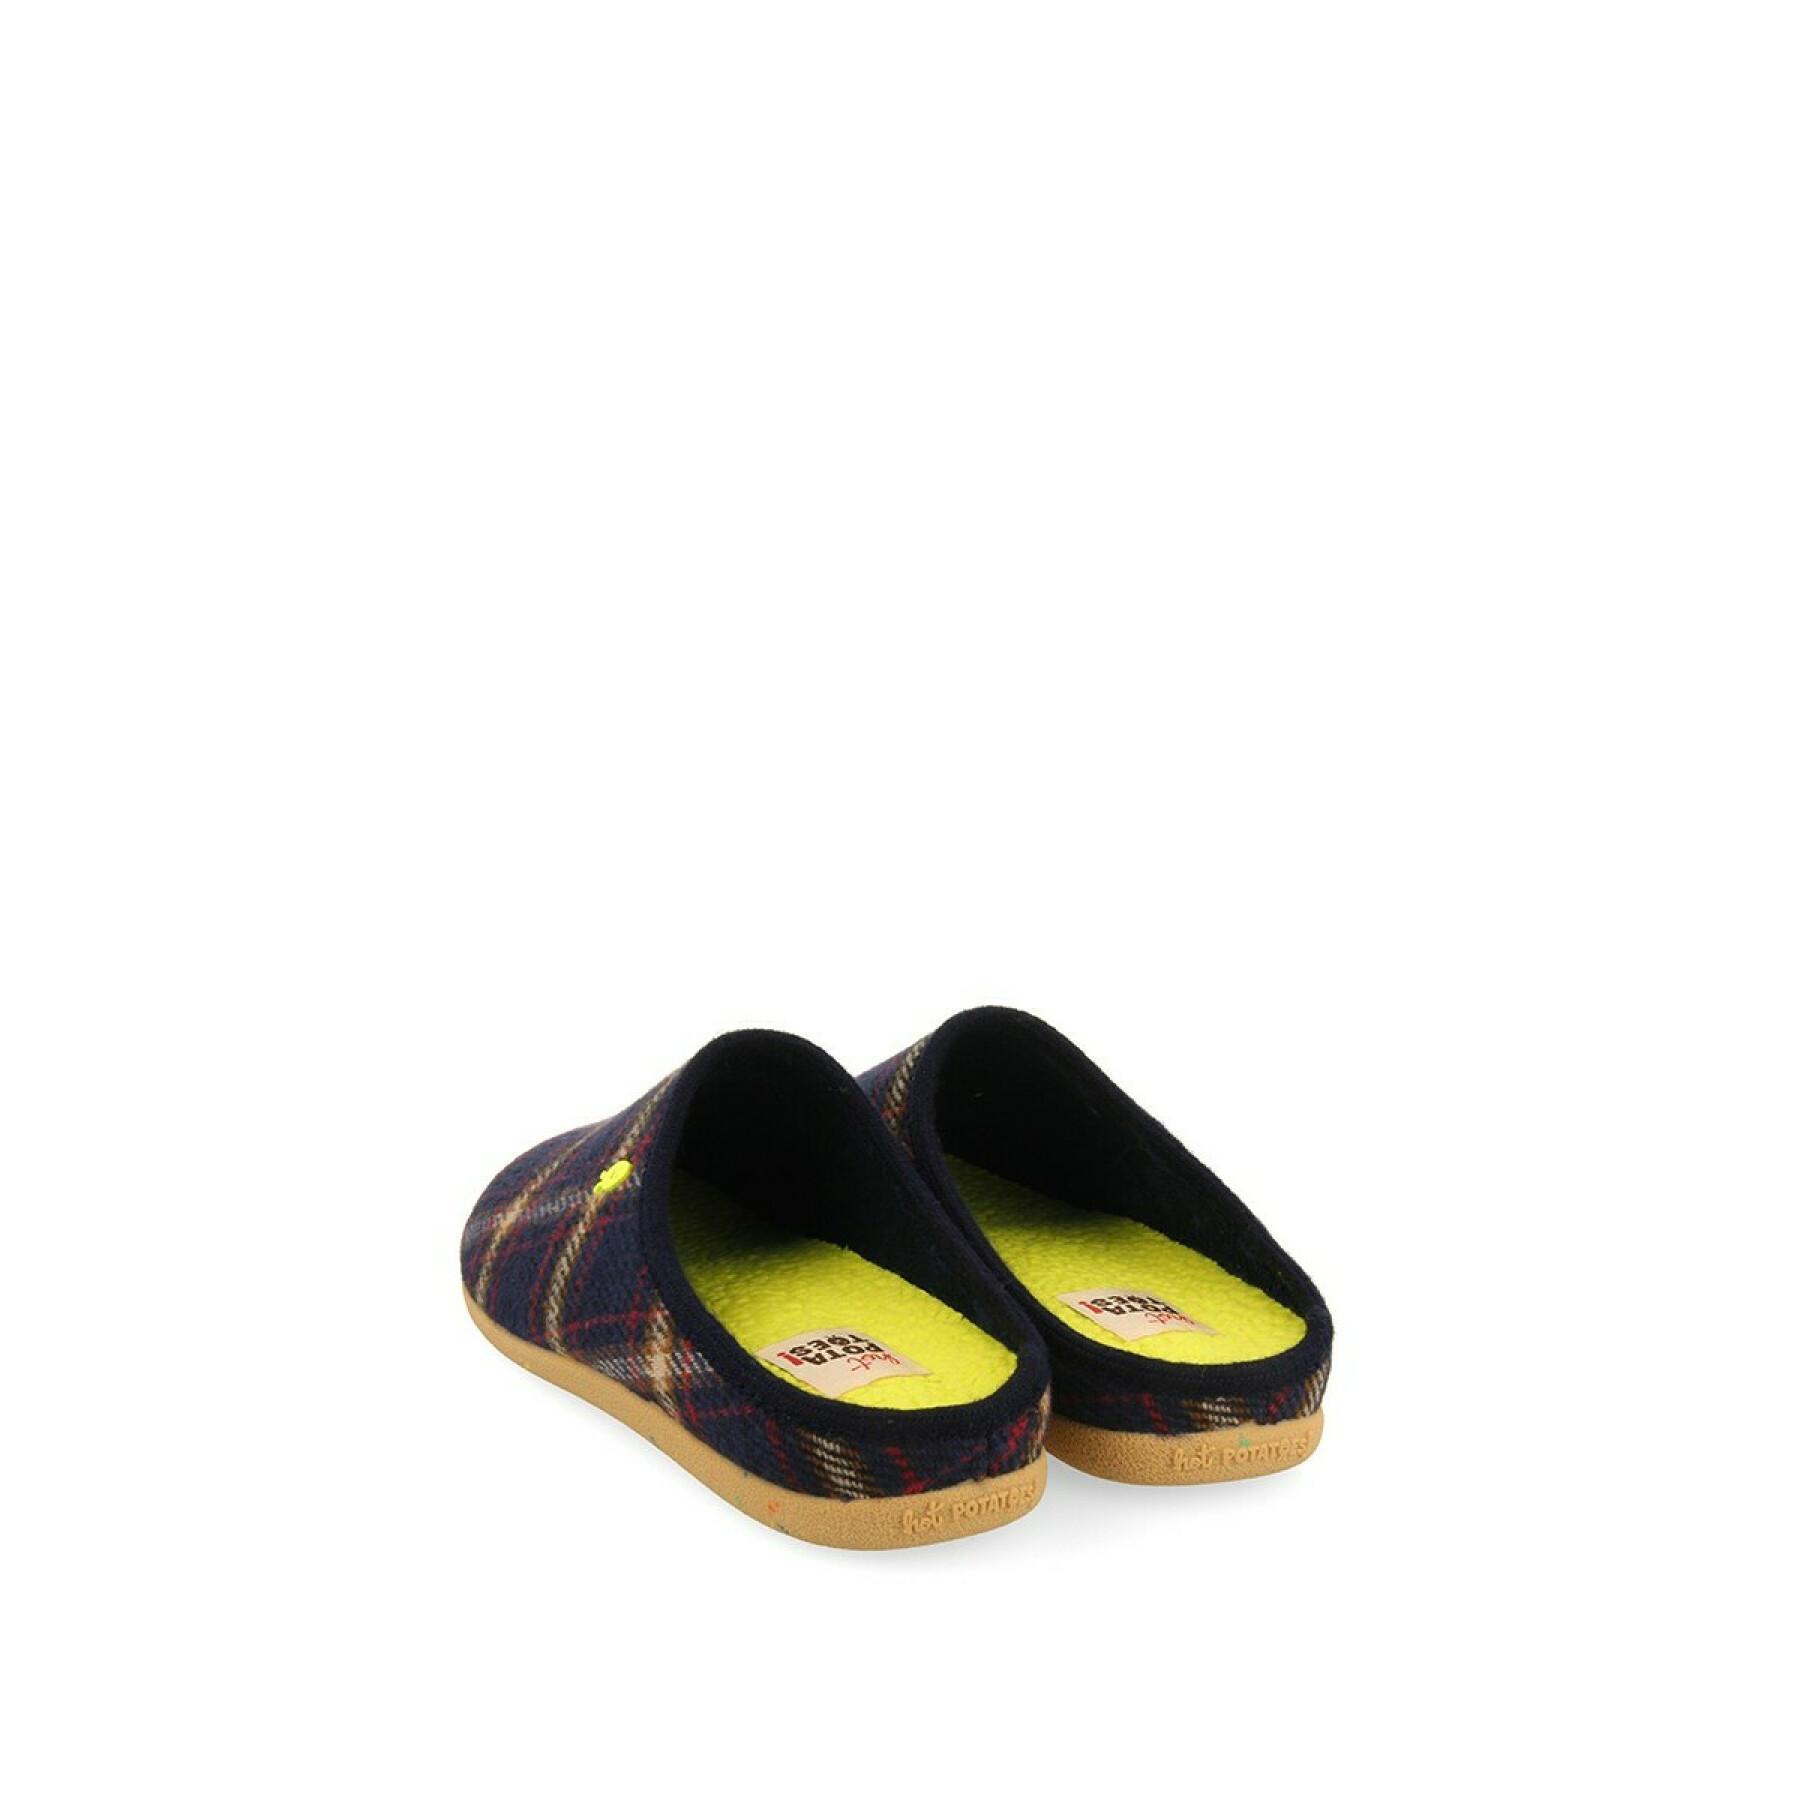 Slippers from the collection Hot Potatoes damuls